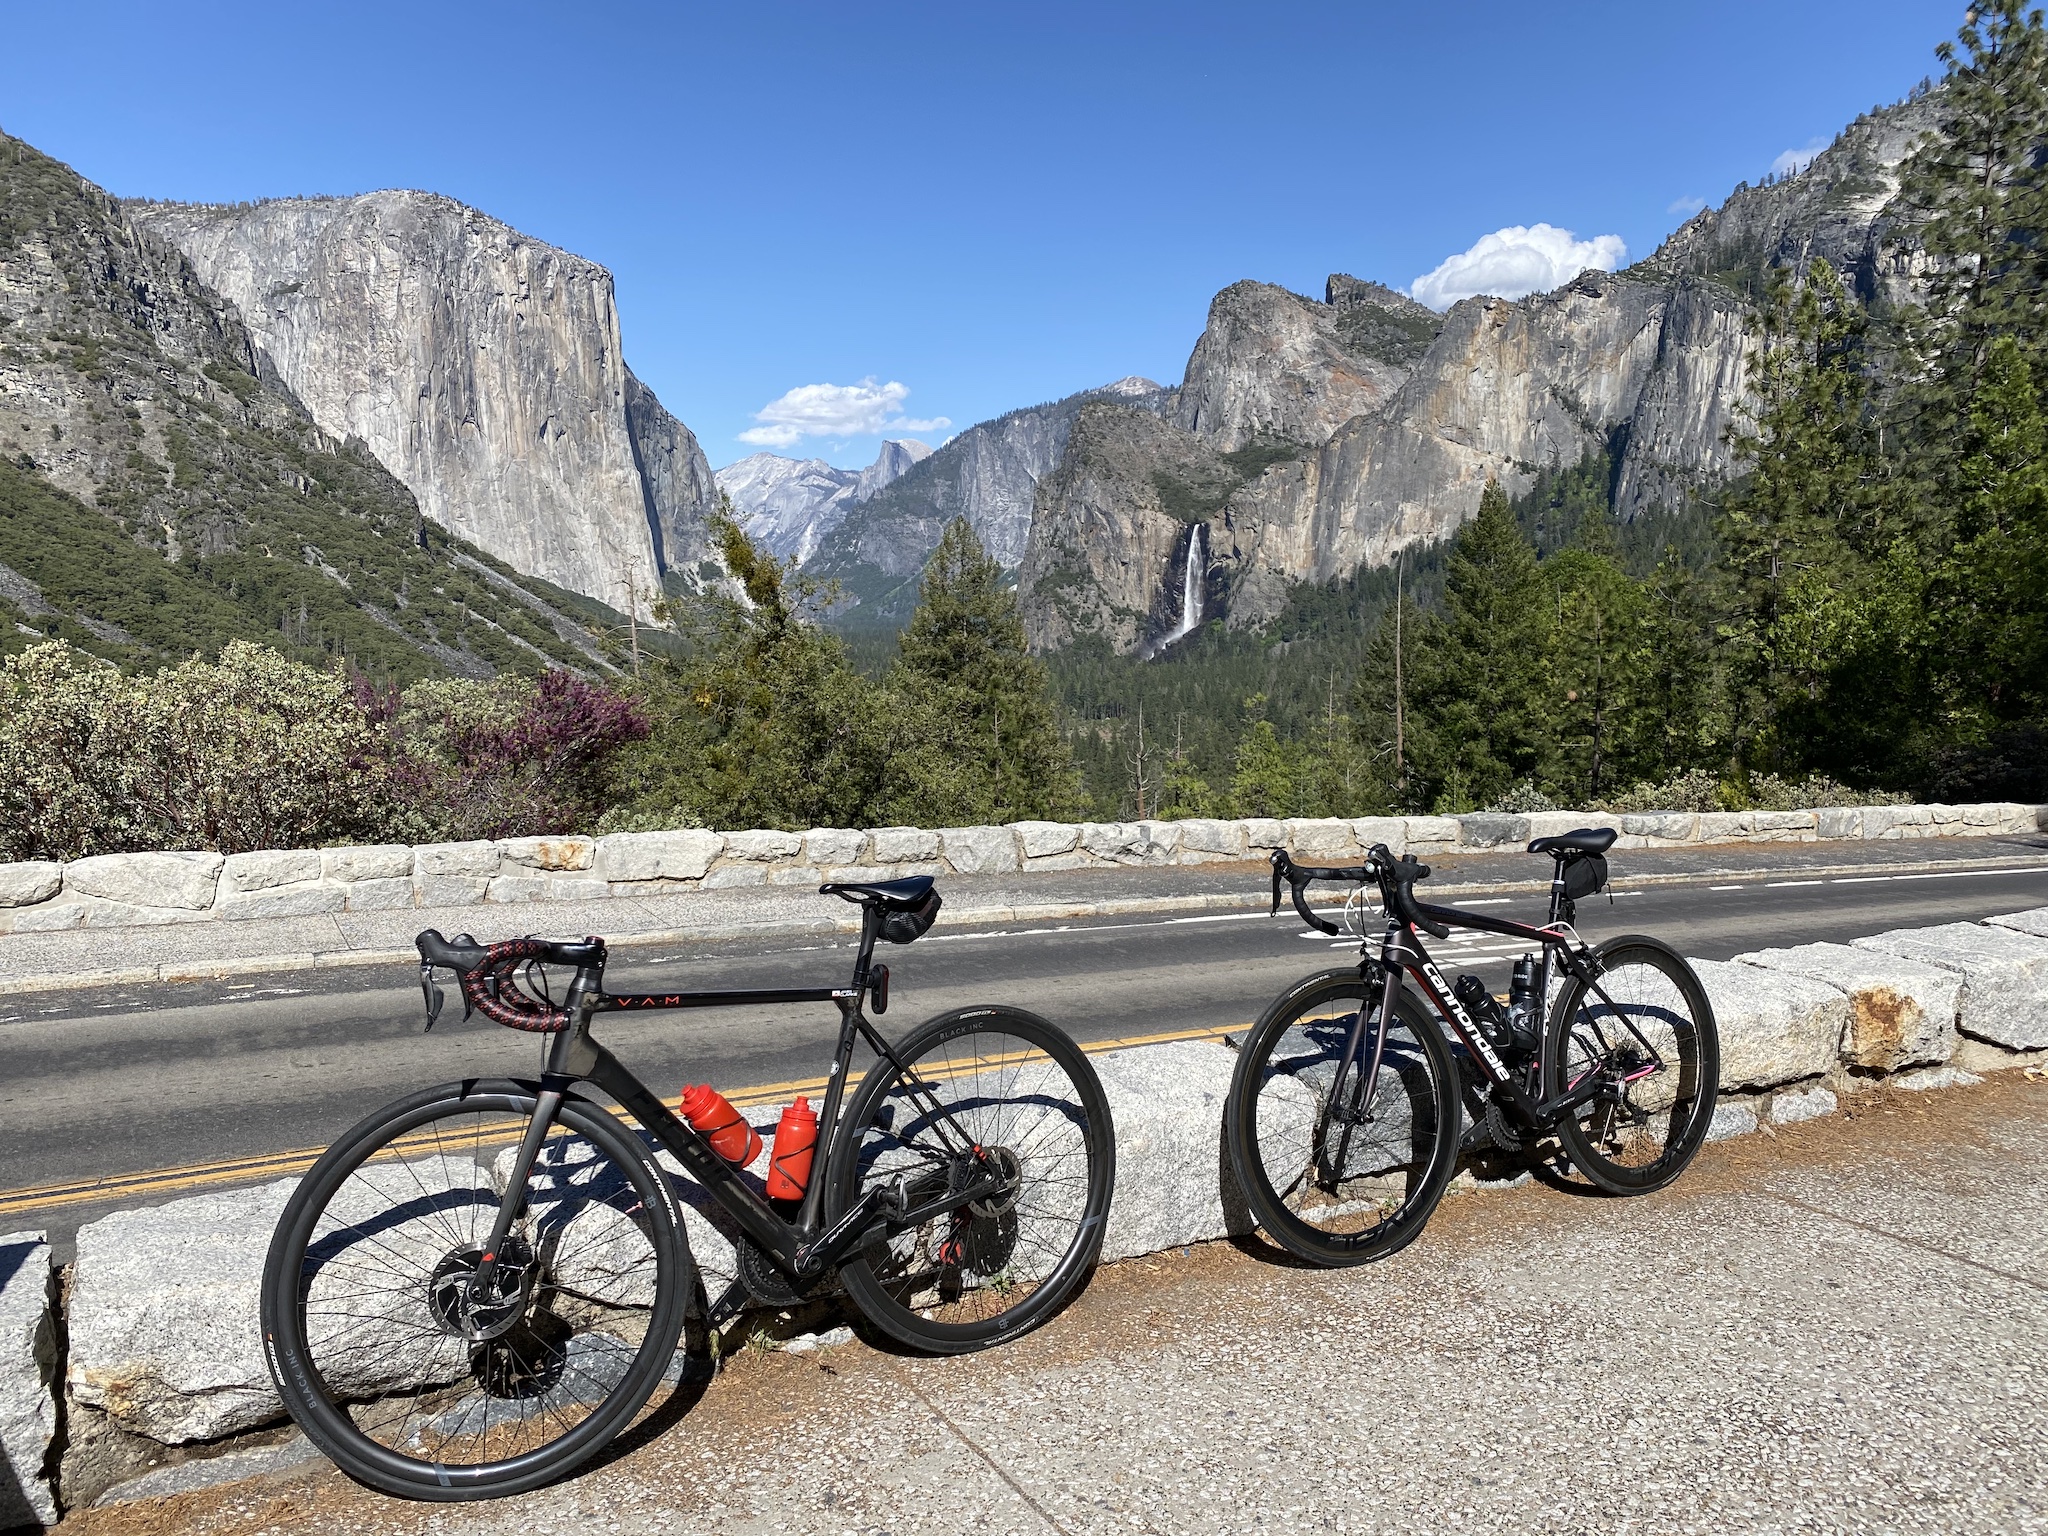 Factor O2 VAM and Cannondale Synapse bikes at Tunnel View overlooking Yosemite Valley in Yosemite National Park.